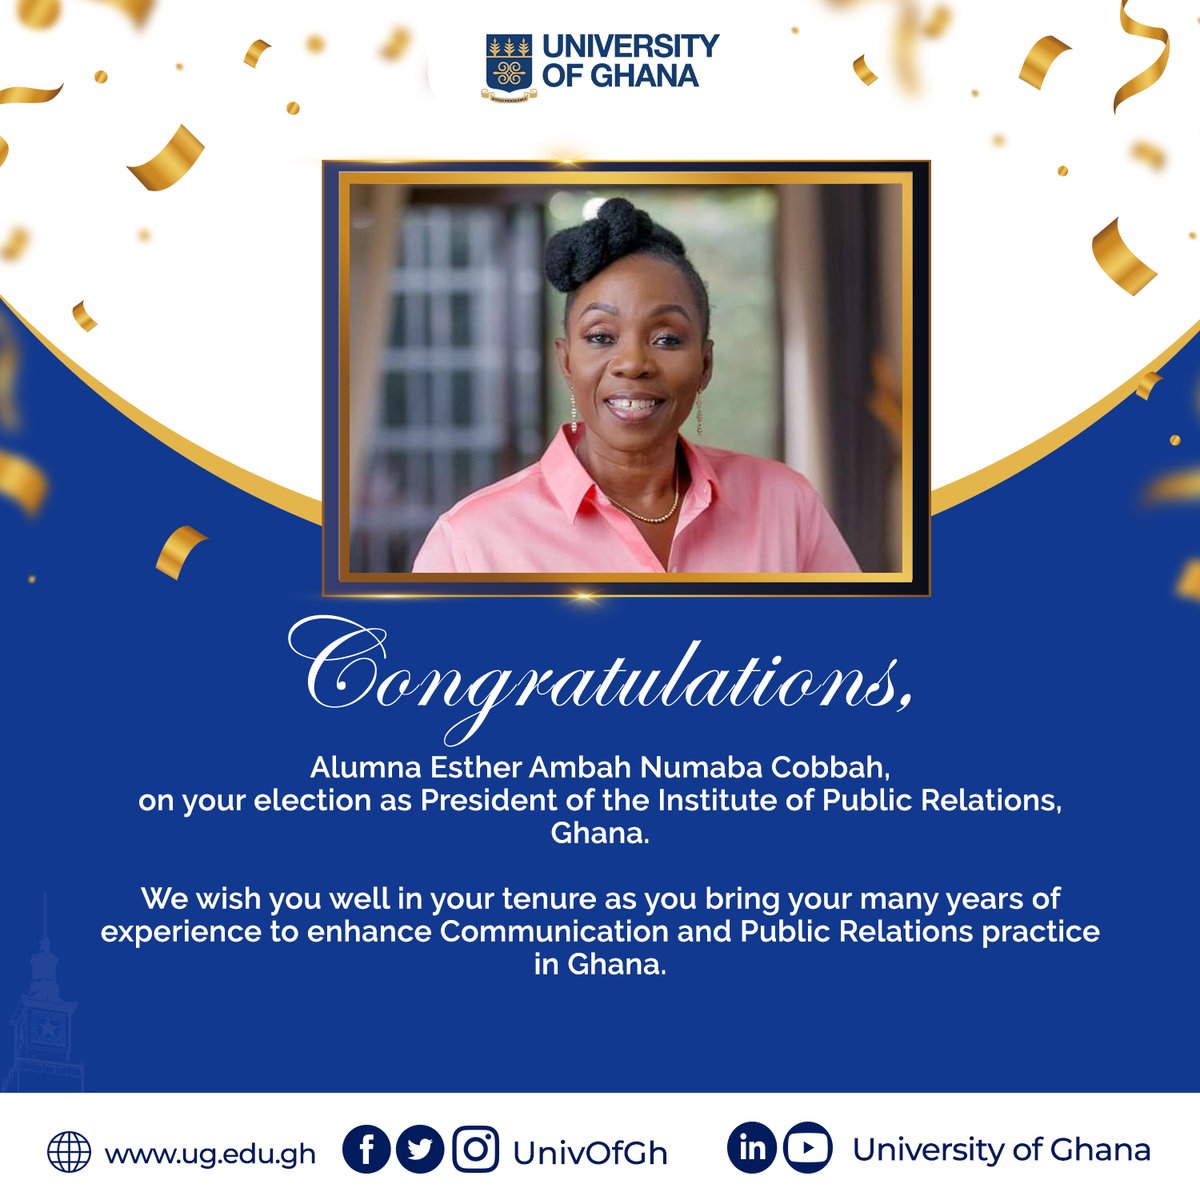 Congratulations Alumna Esther Ambah Numaba Cobbah on your election as President of the Institute of Public Relations Ghana. We wish you well in your tenure. #UGIS75 #IntegriProcedamus